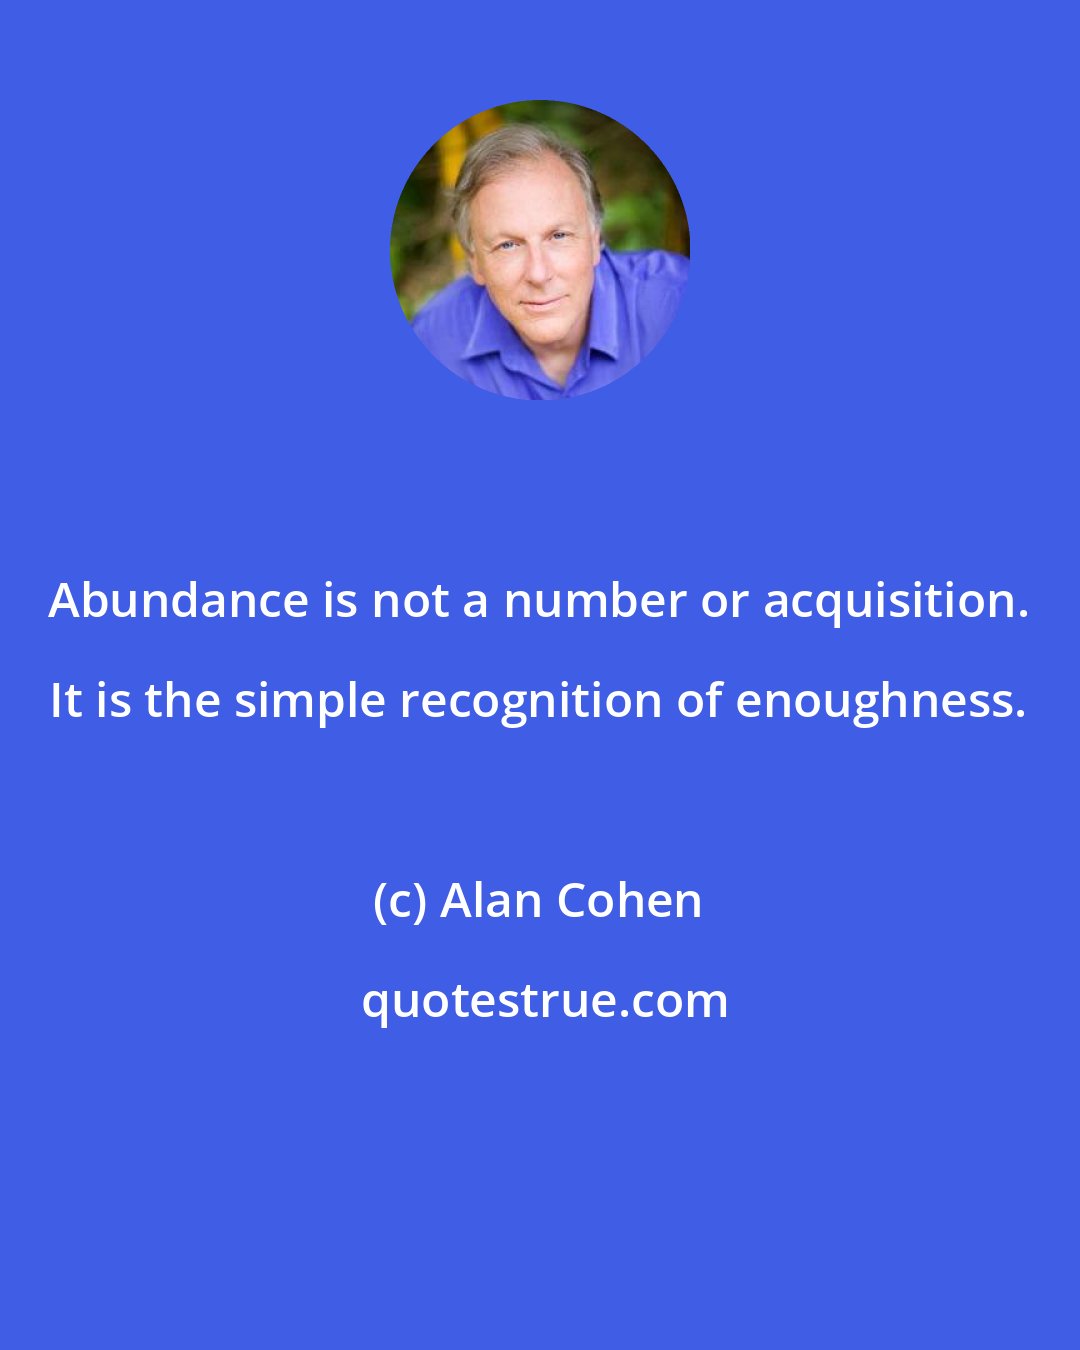 Alan Cohen: Abundance is not a number or acquisition. It is the simple recognition of enoughness.